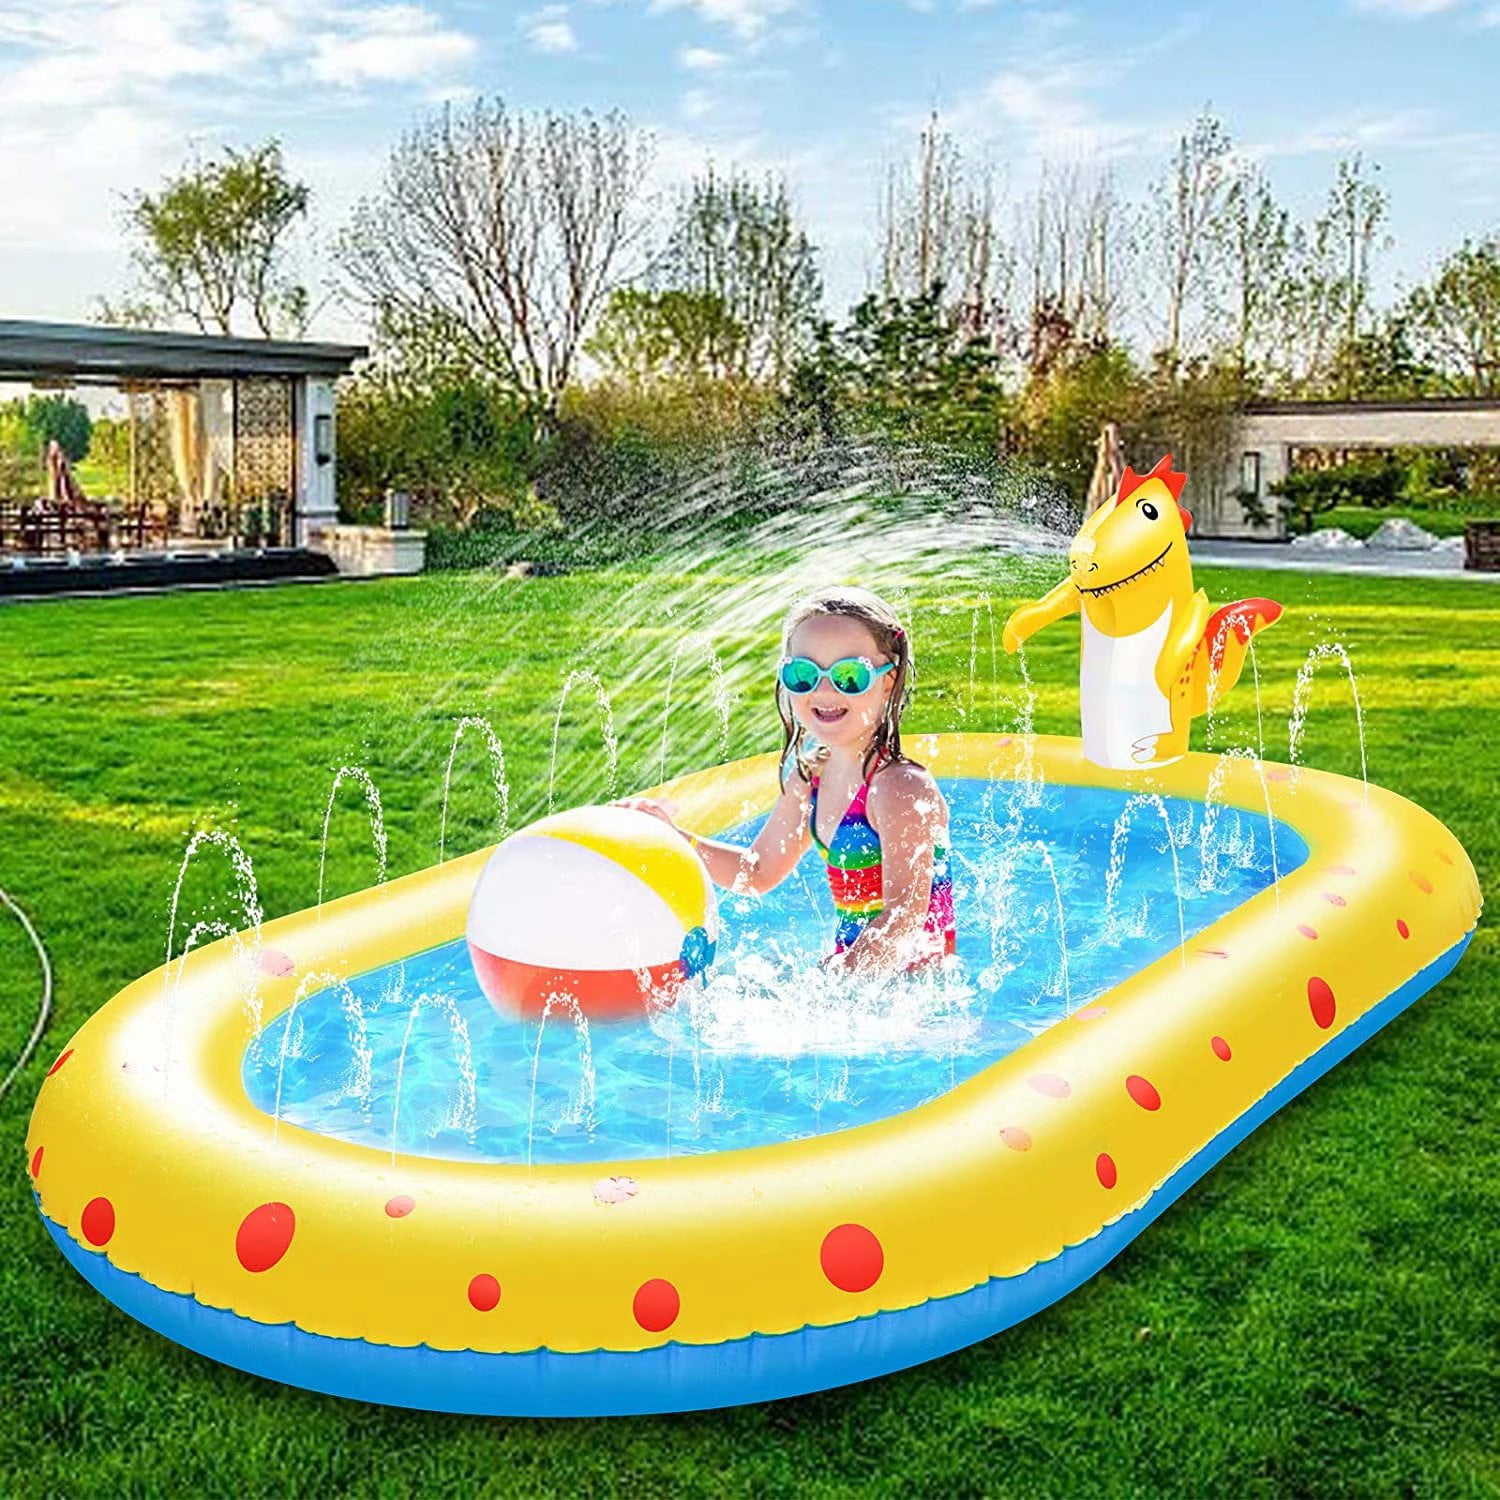 Inflatable Football Outdoor Beach Pool Party Summer Toys Games 8” Football 